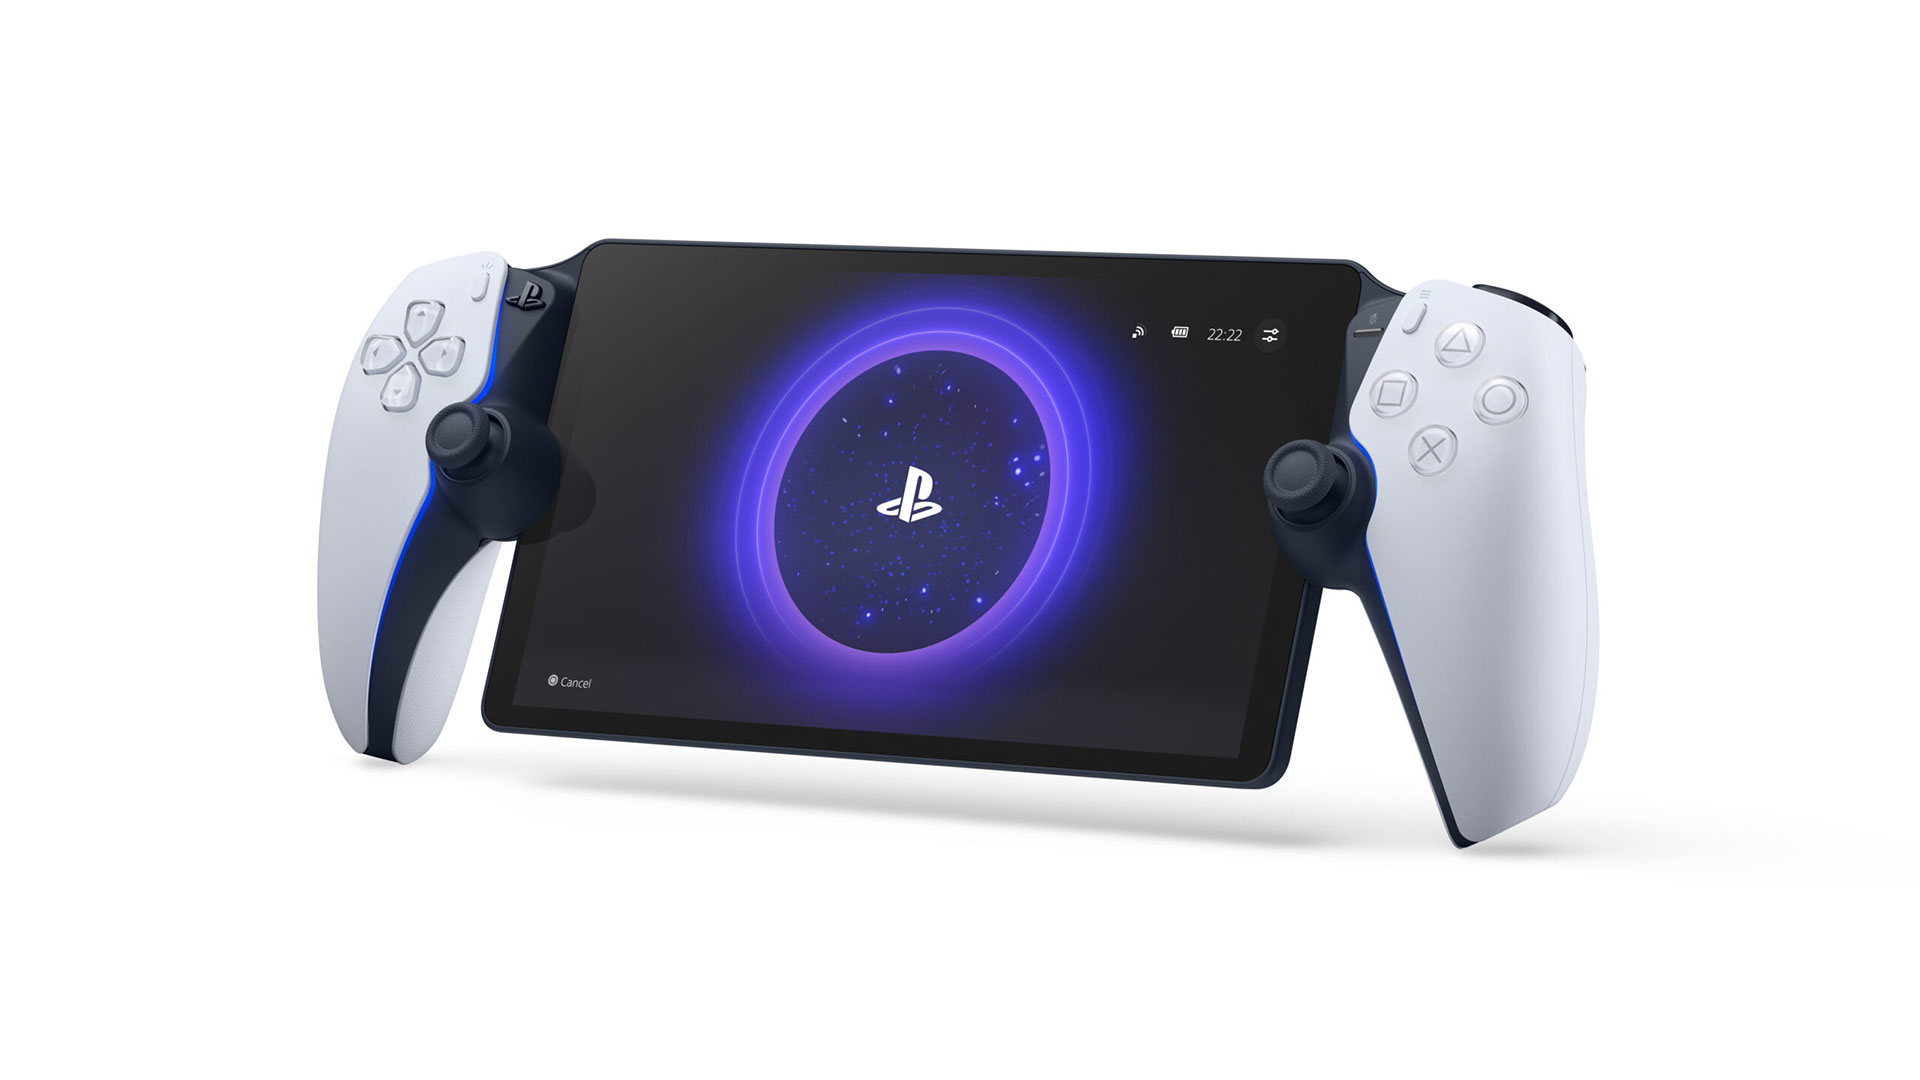 The PlayStation Portal remote player launches later this year for $199.99 USD